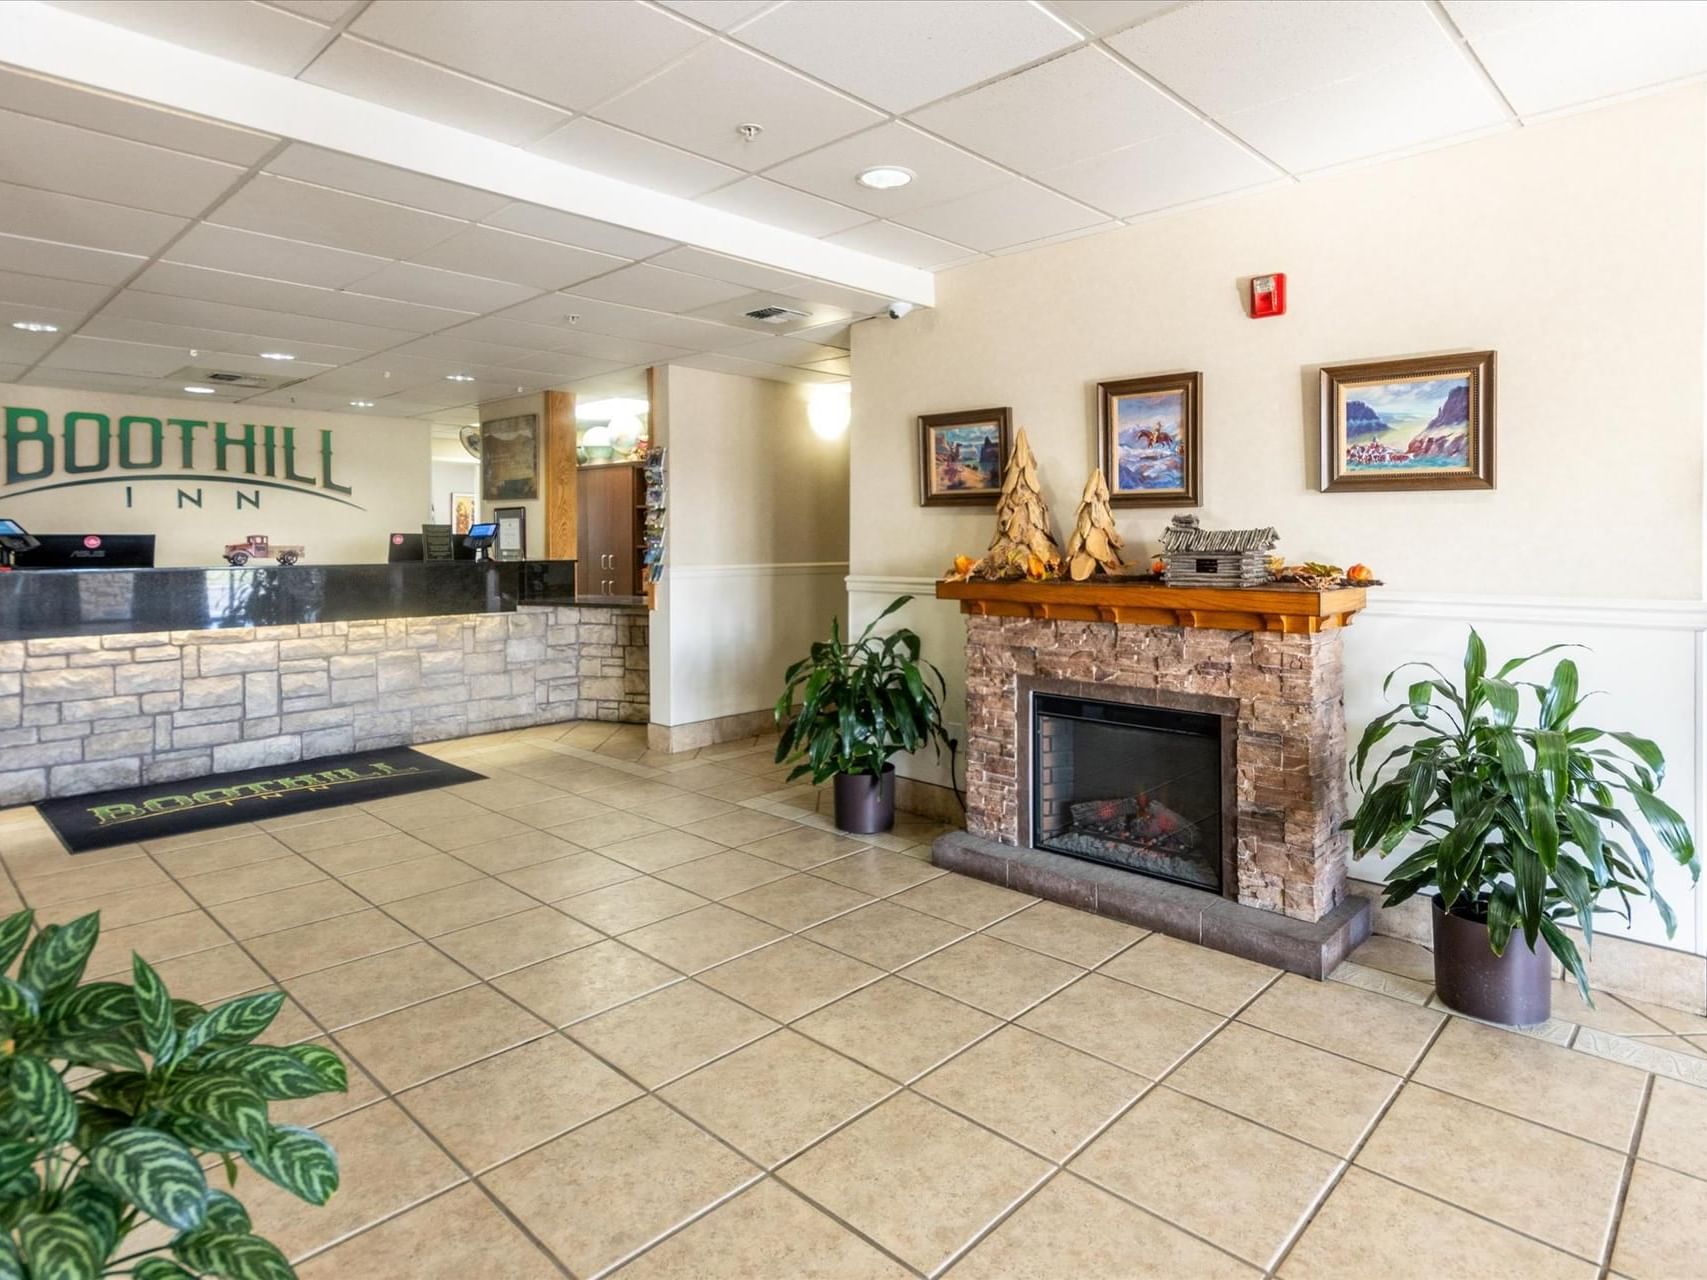 Front desk & fireplace by the lobby area at Boothill Inn & Suites